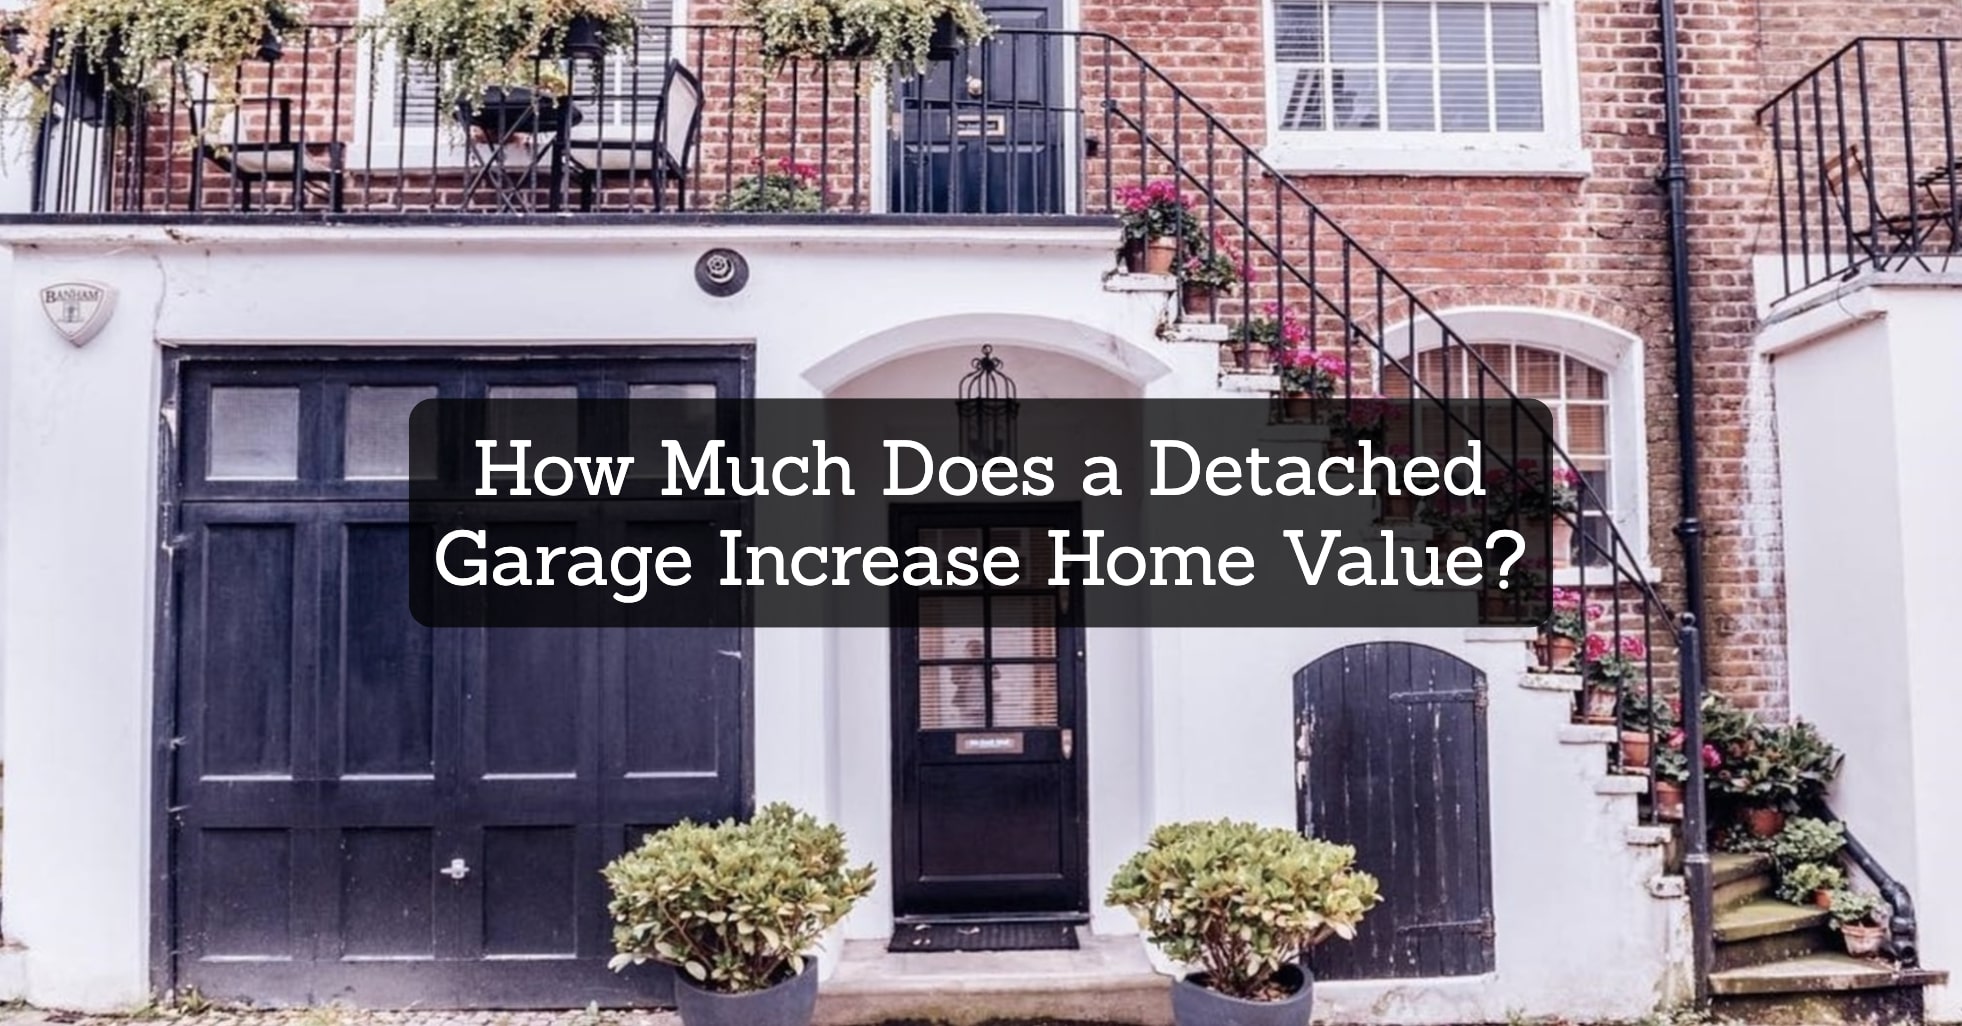 How-Much-Does-a-Detached-Garage-Increase-Home-Value_